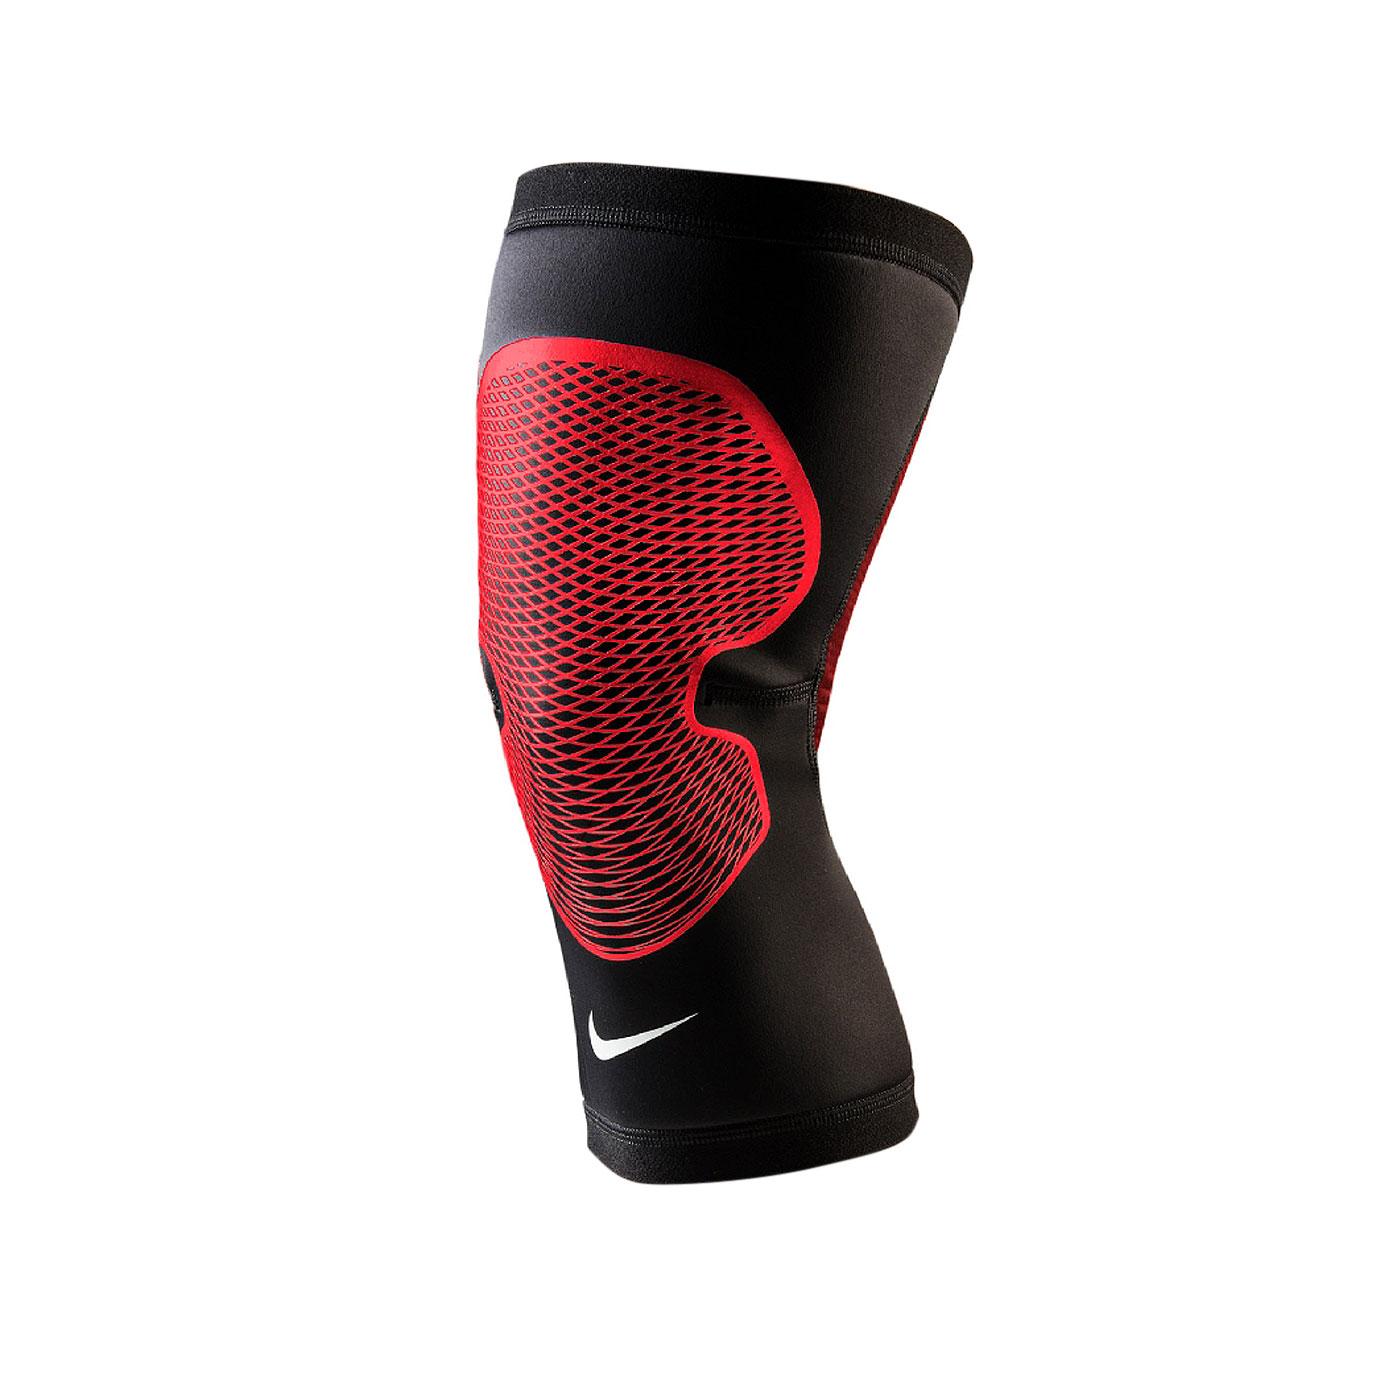 NIKE PRO HYPERSTRONG護膝套 2.0 NMS71002LG - 紅黑白